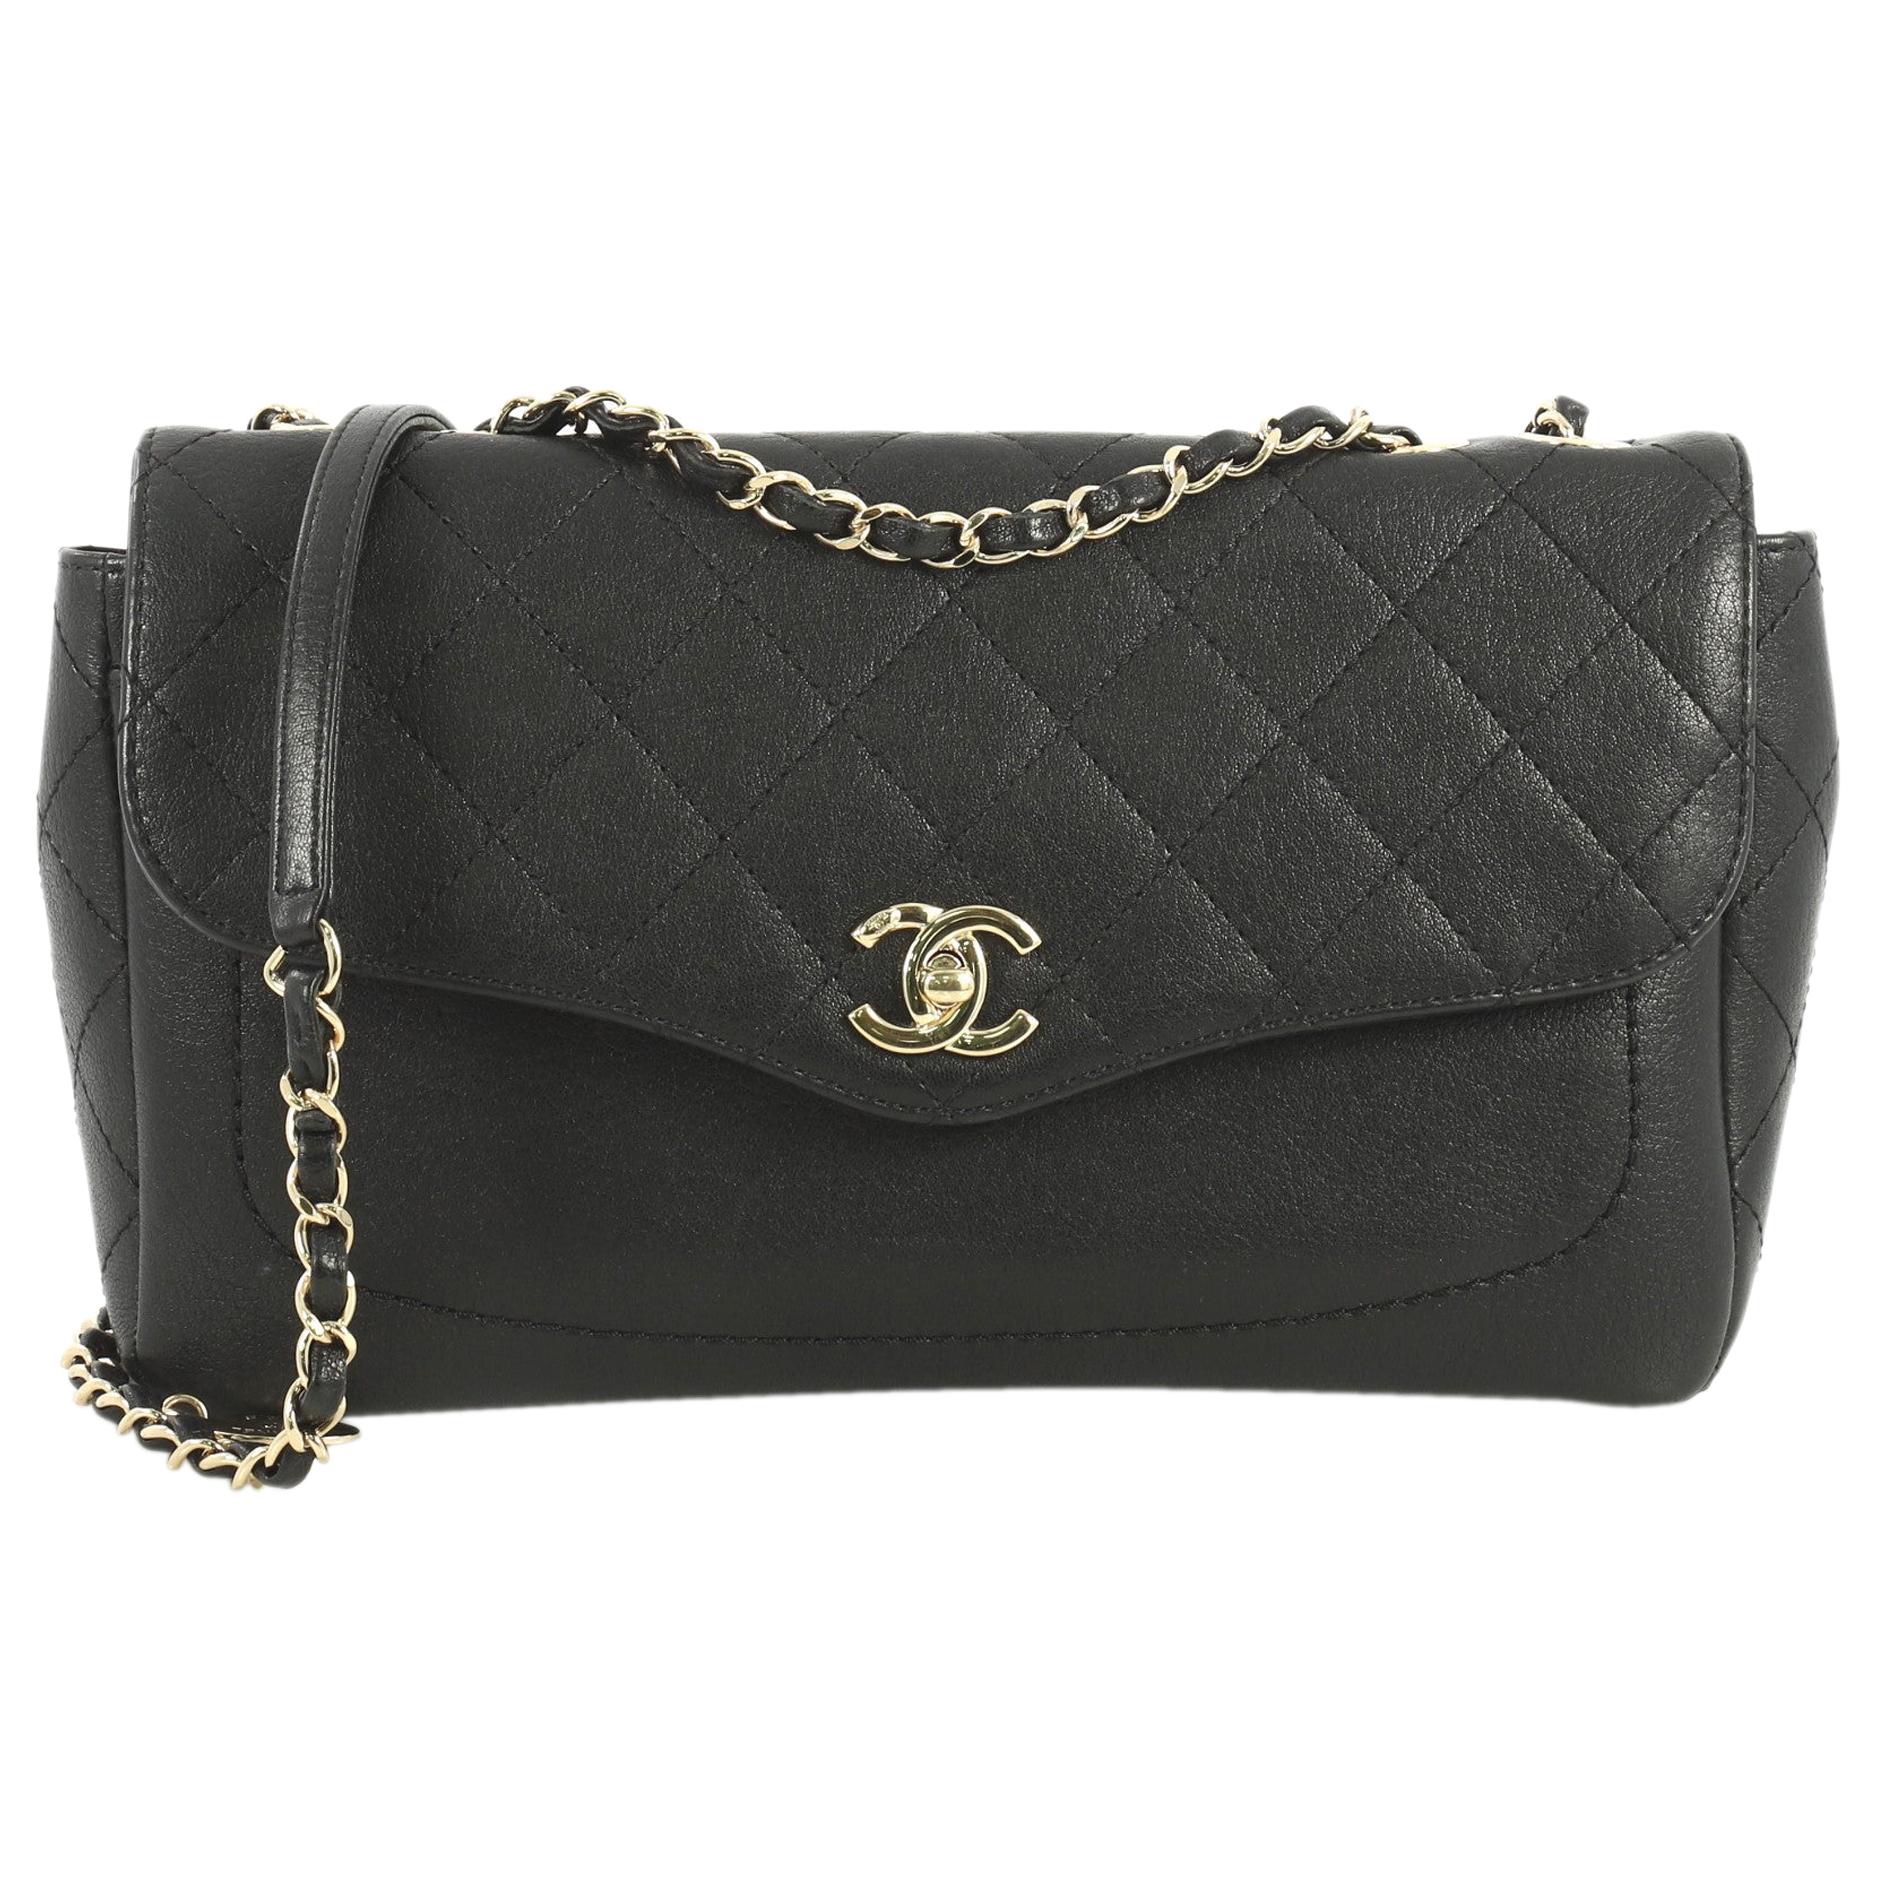 Chanel Coco Curve Flap Messenger Quilted Goatskin Large